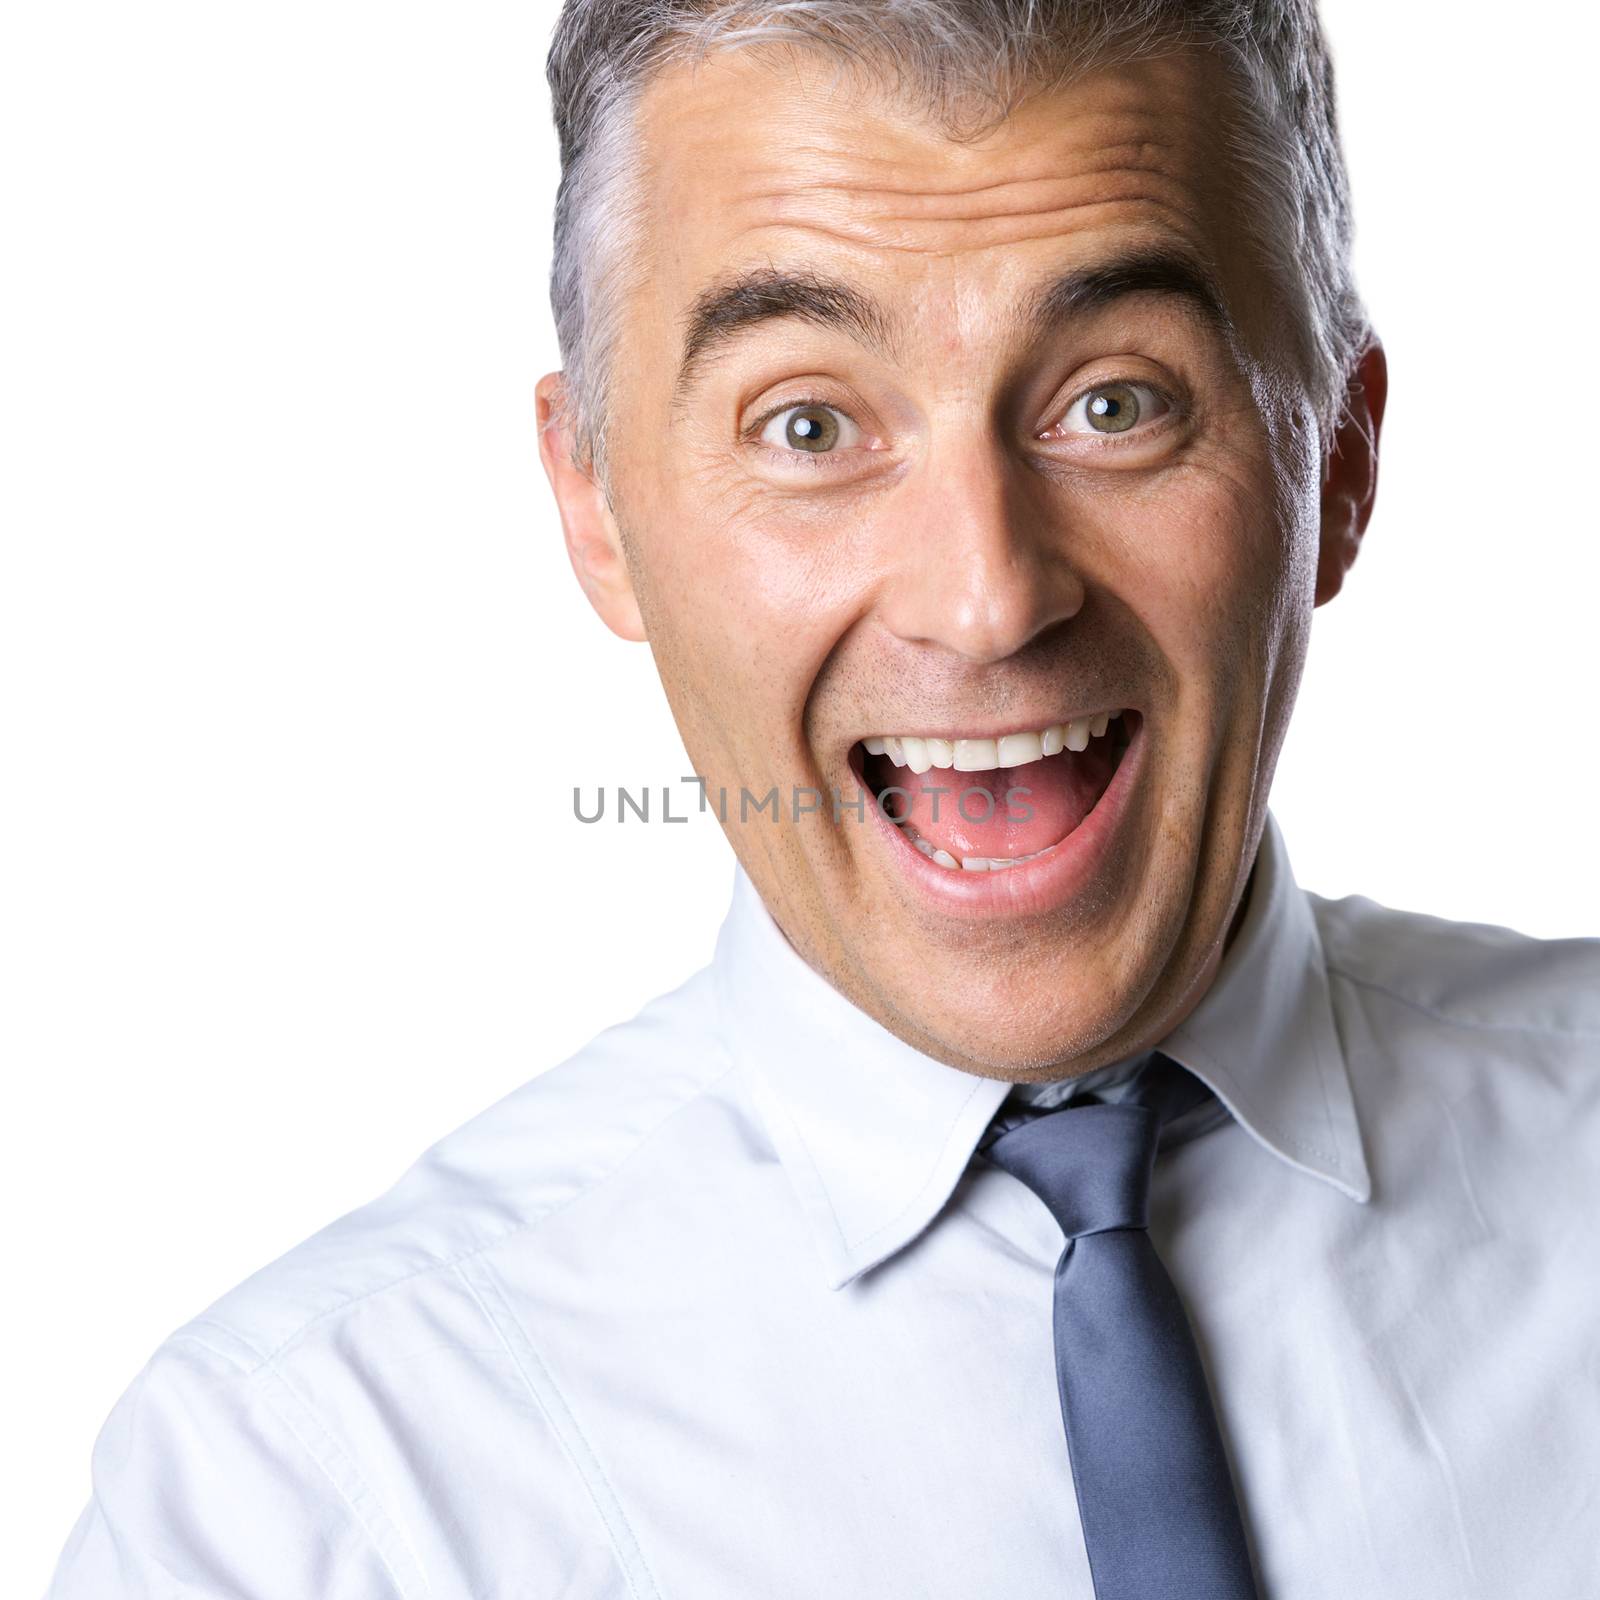 Cheerful excited businessman with mouth open and raised eyebrows on white background.